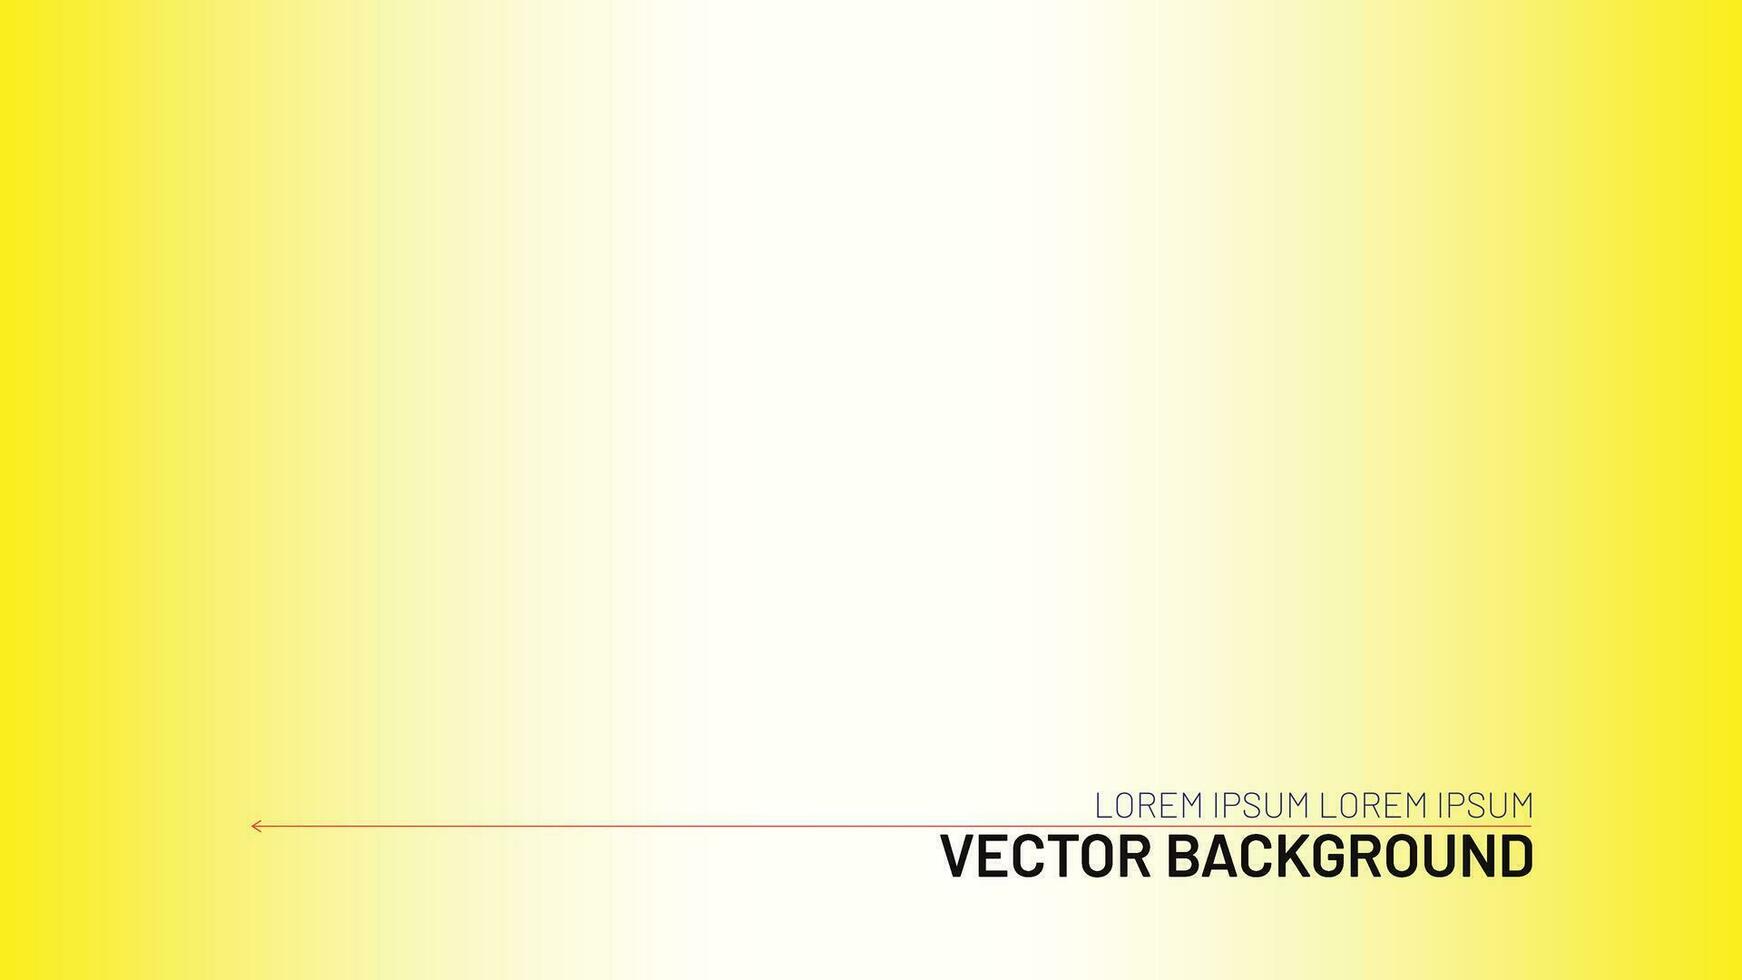 Blurred background. Abstract yellow gradient design vector